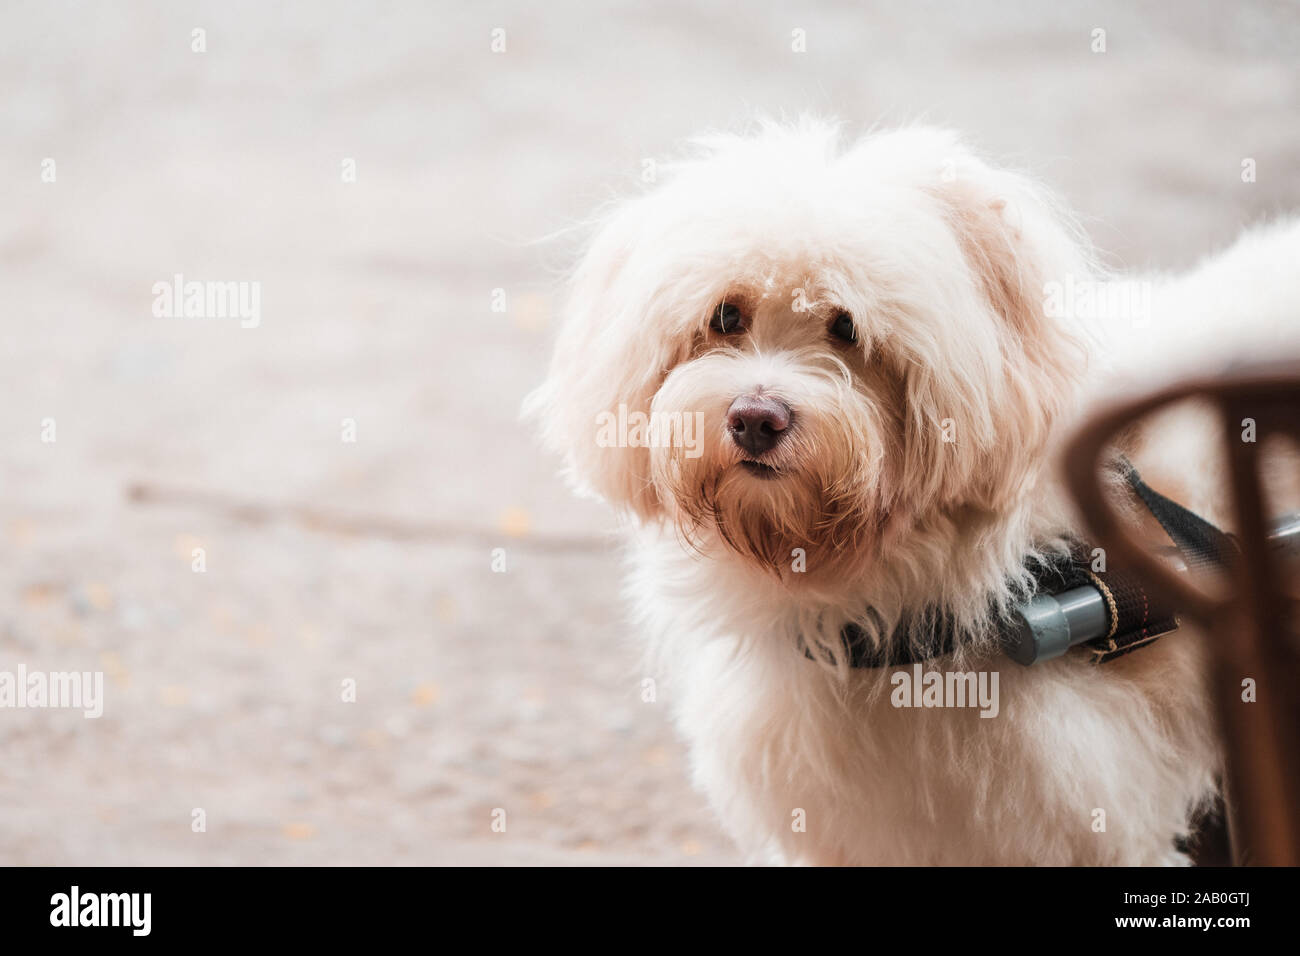 A small cute handicapped dog in a wheelchair paralyzed half way in the street looking towards the camera Stock Photo